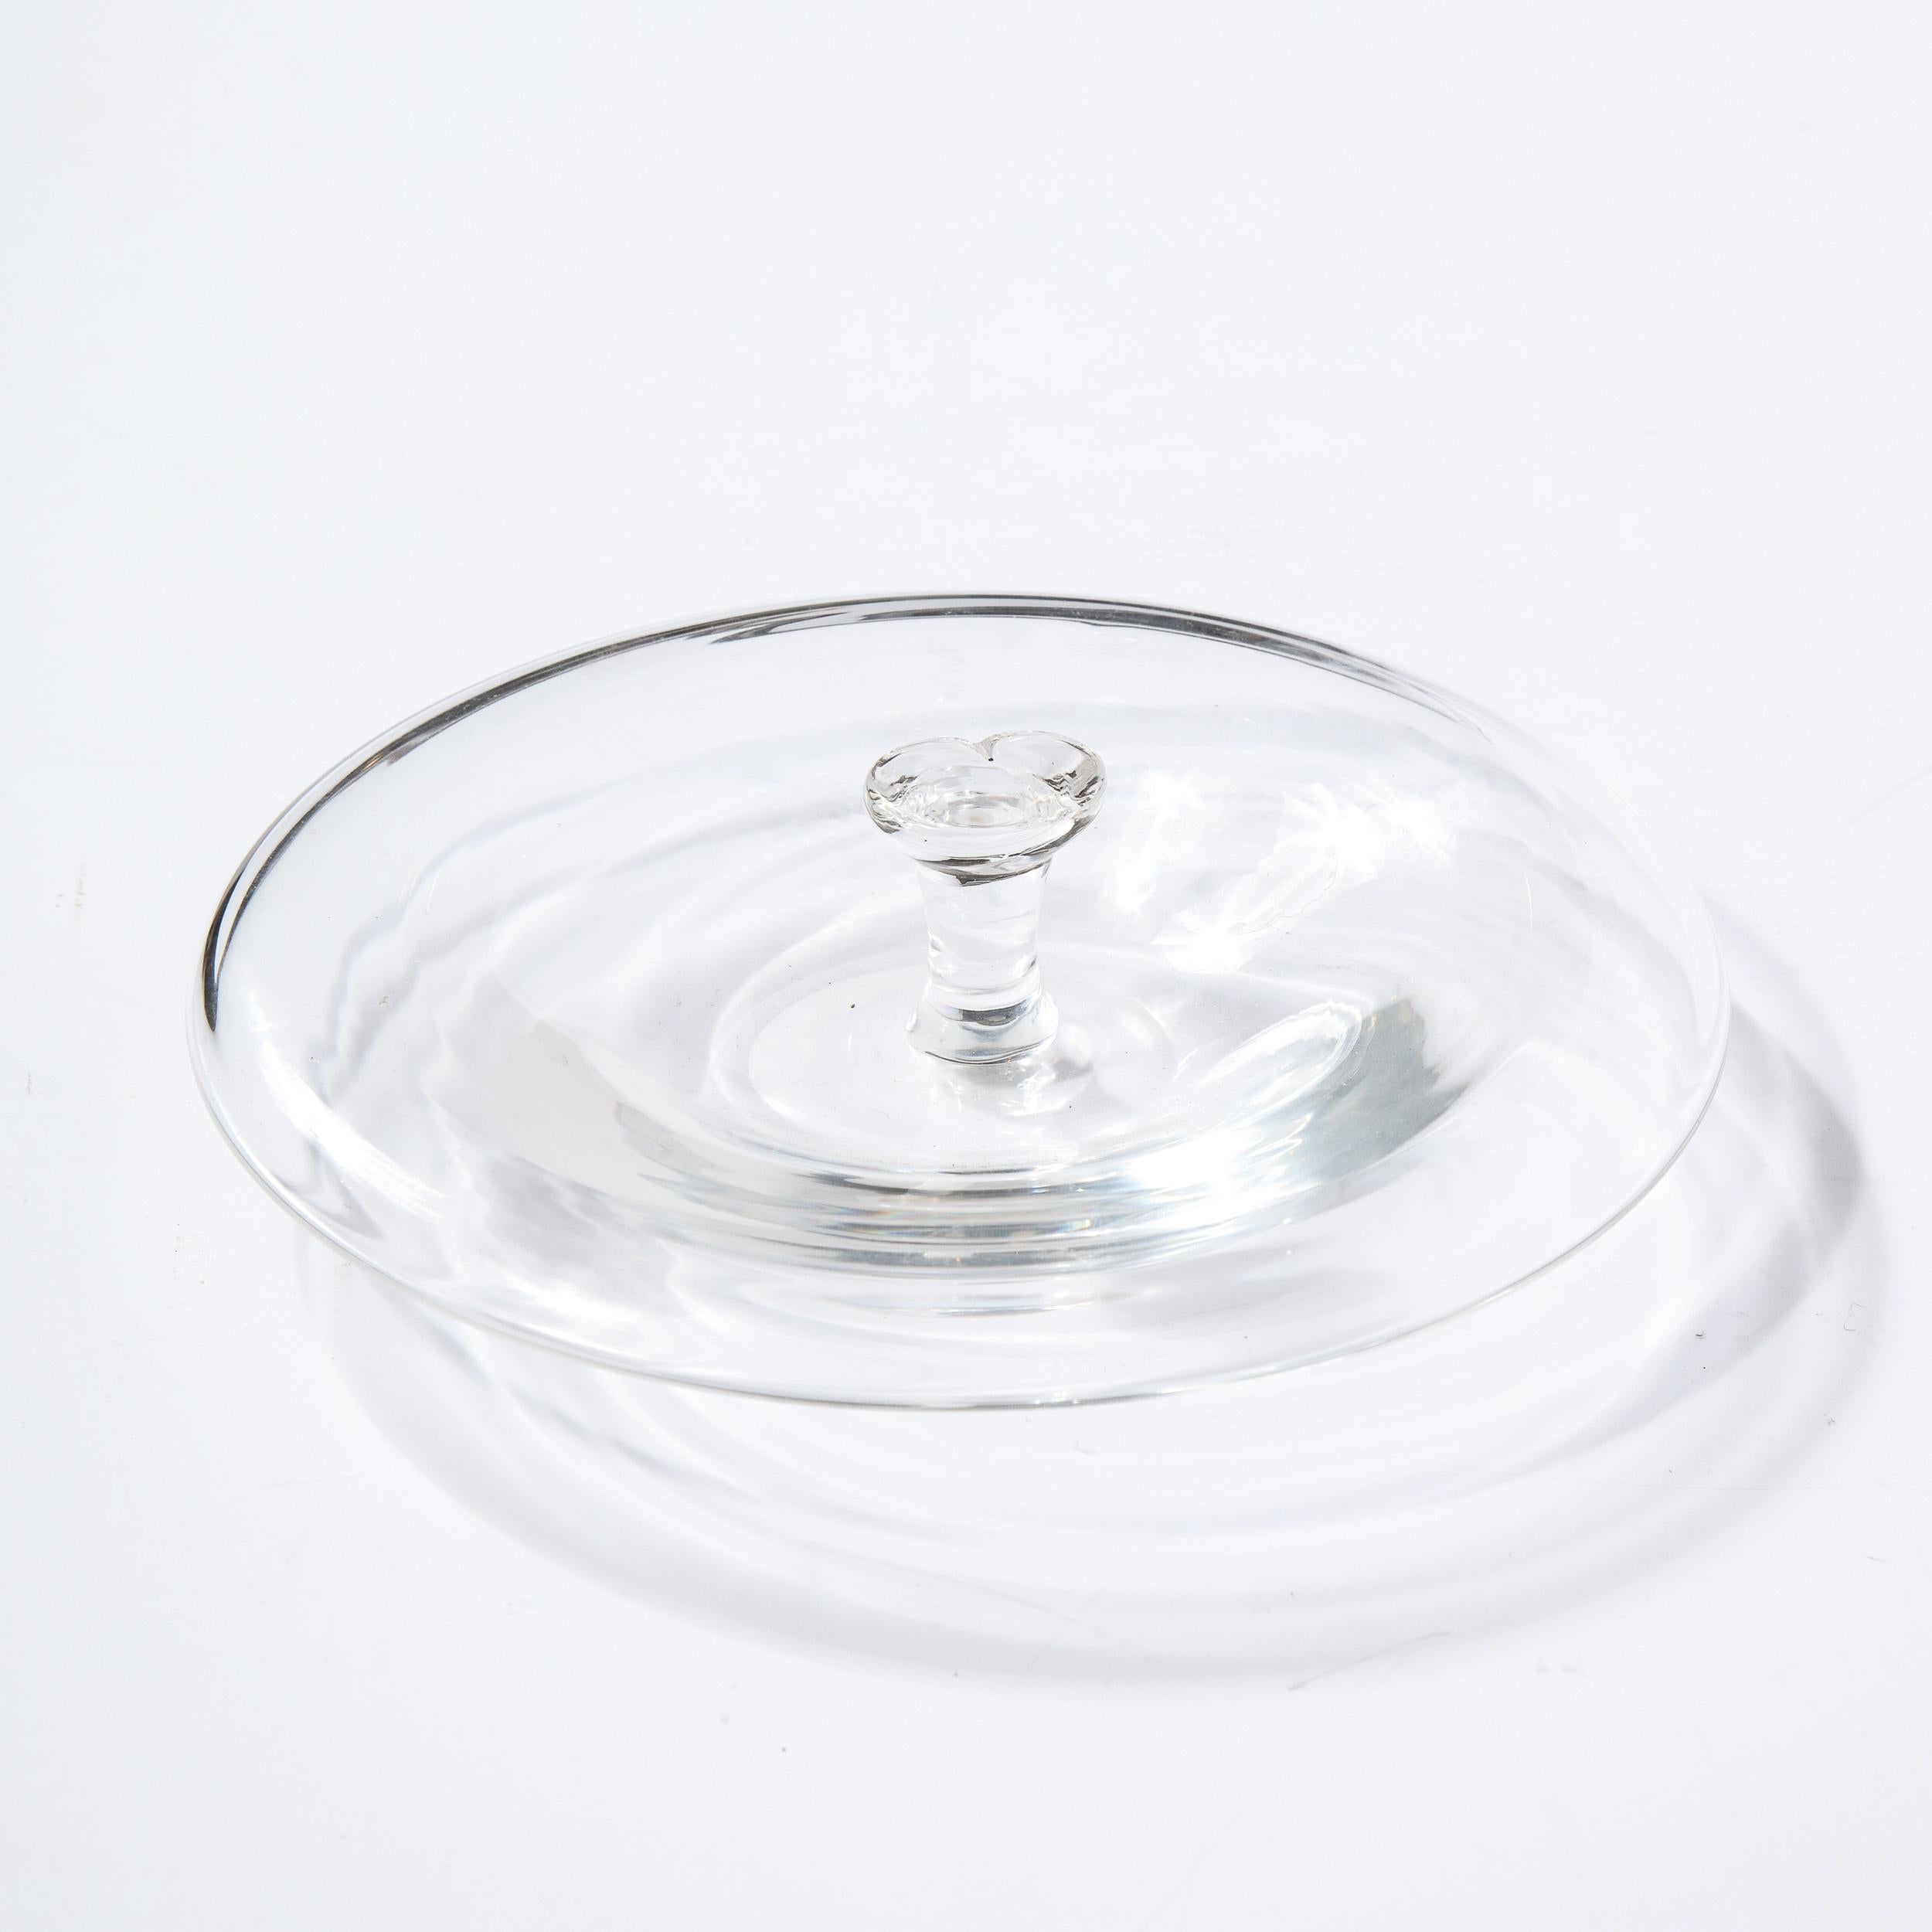 Mid-Century Modern Translucent Glass Decorative Dish by Elsa Peretti for Tiffany For Sale 3